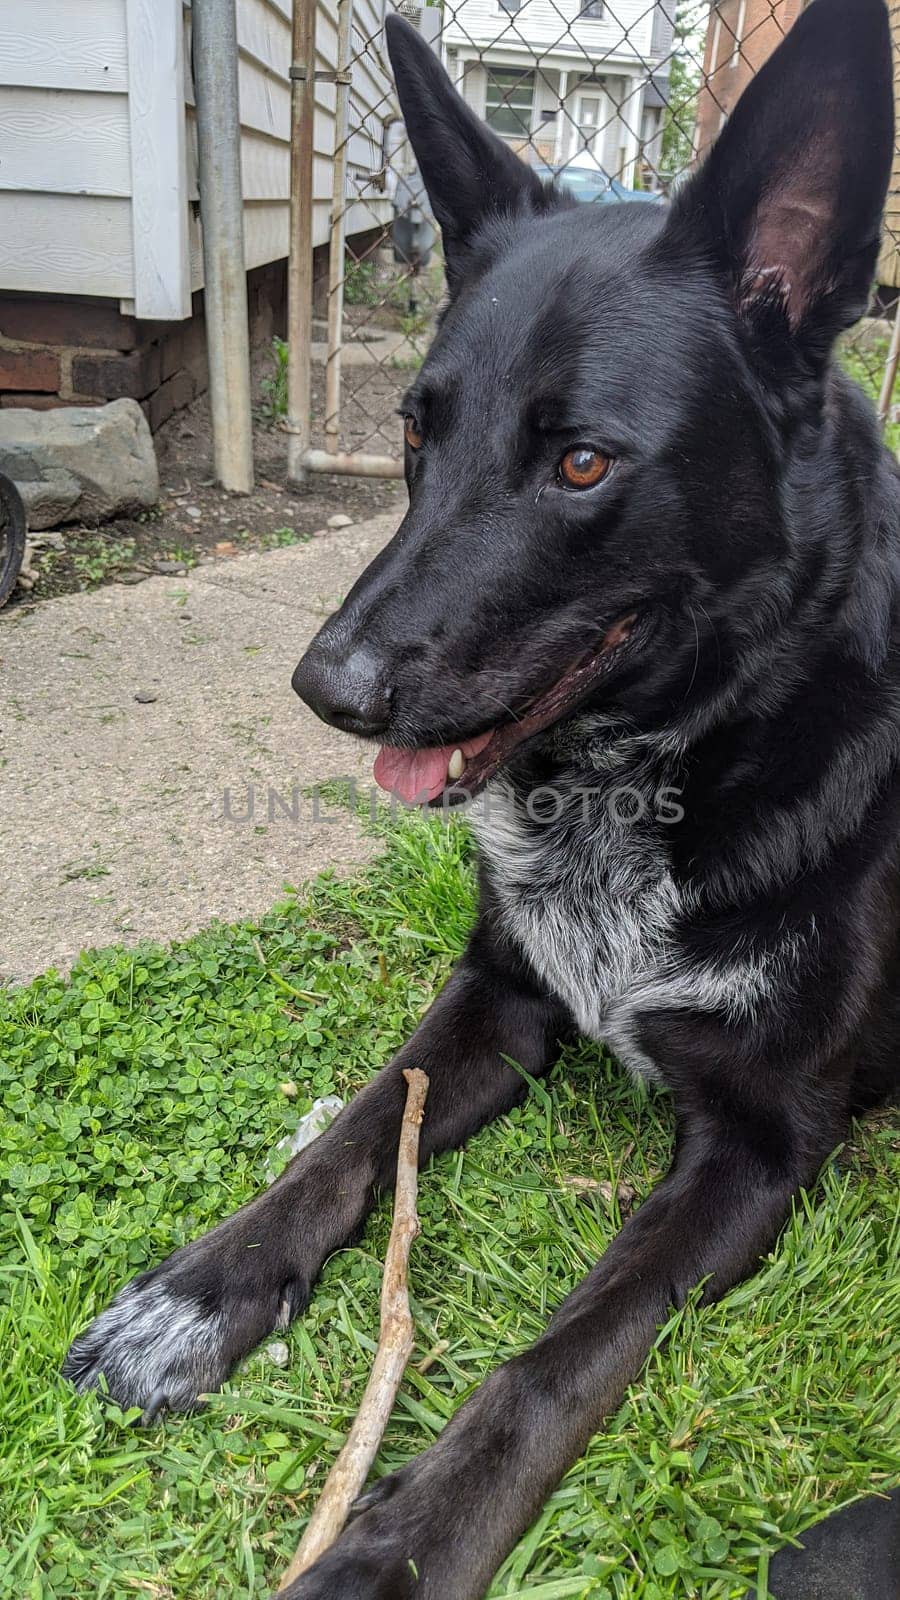 Attentive black dog ready to play in a sunny backyard, exuding happiness and companionship